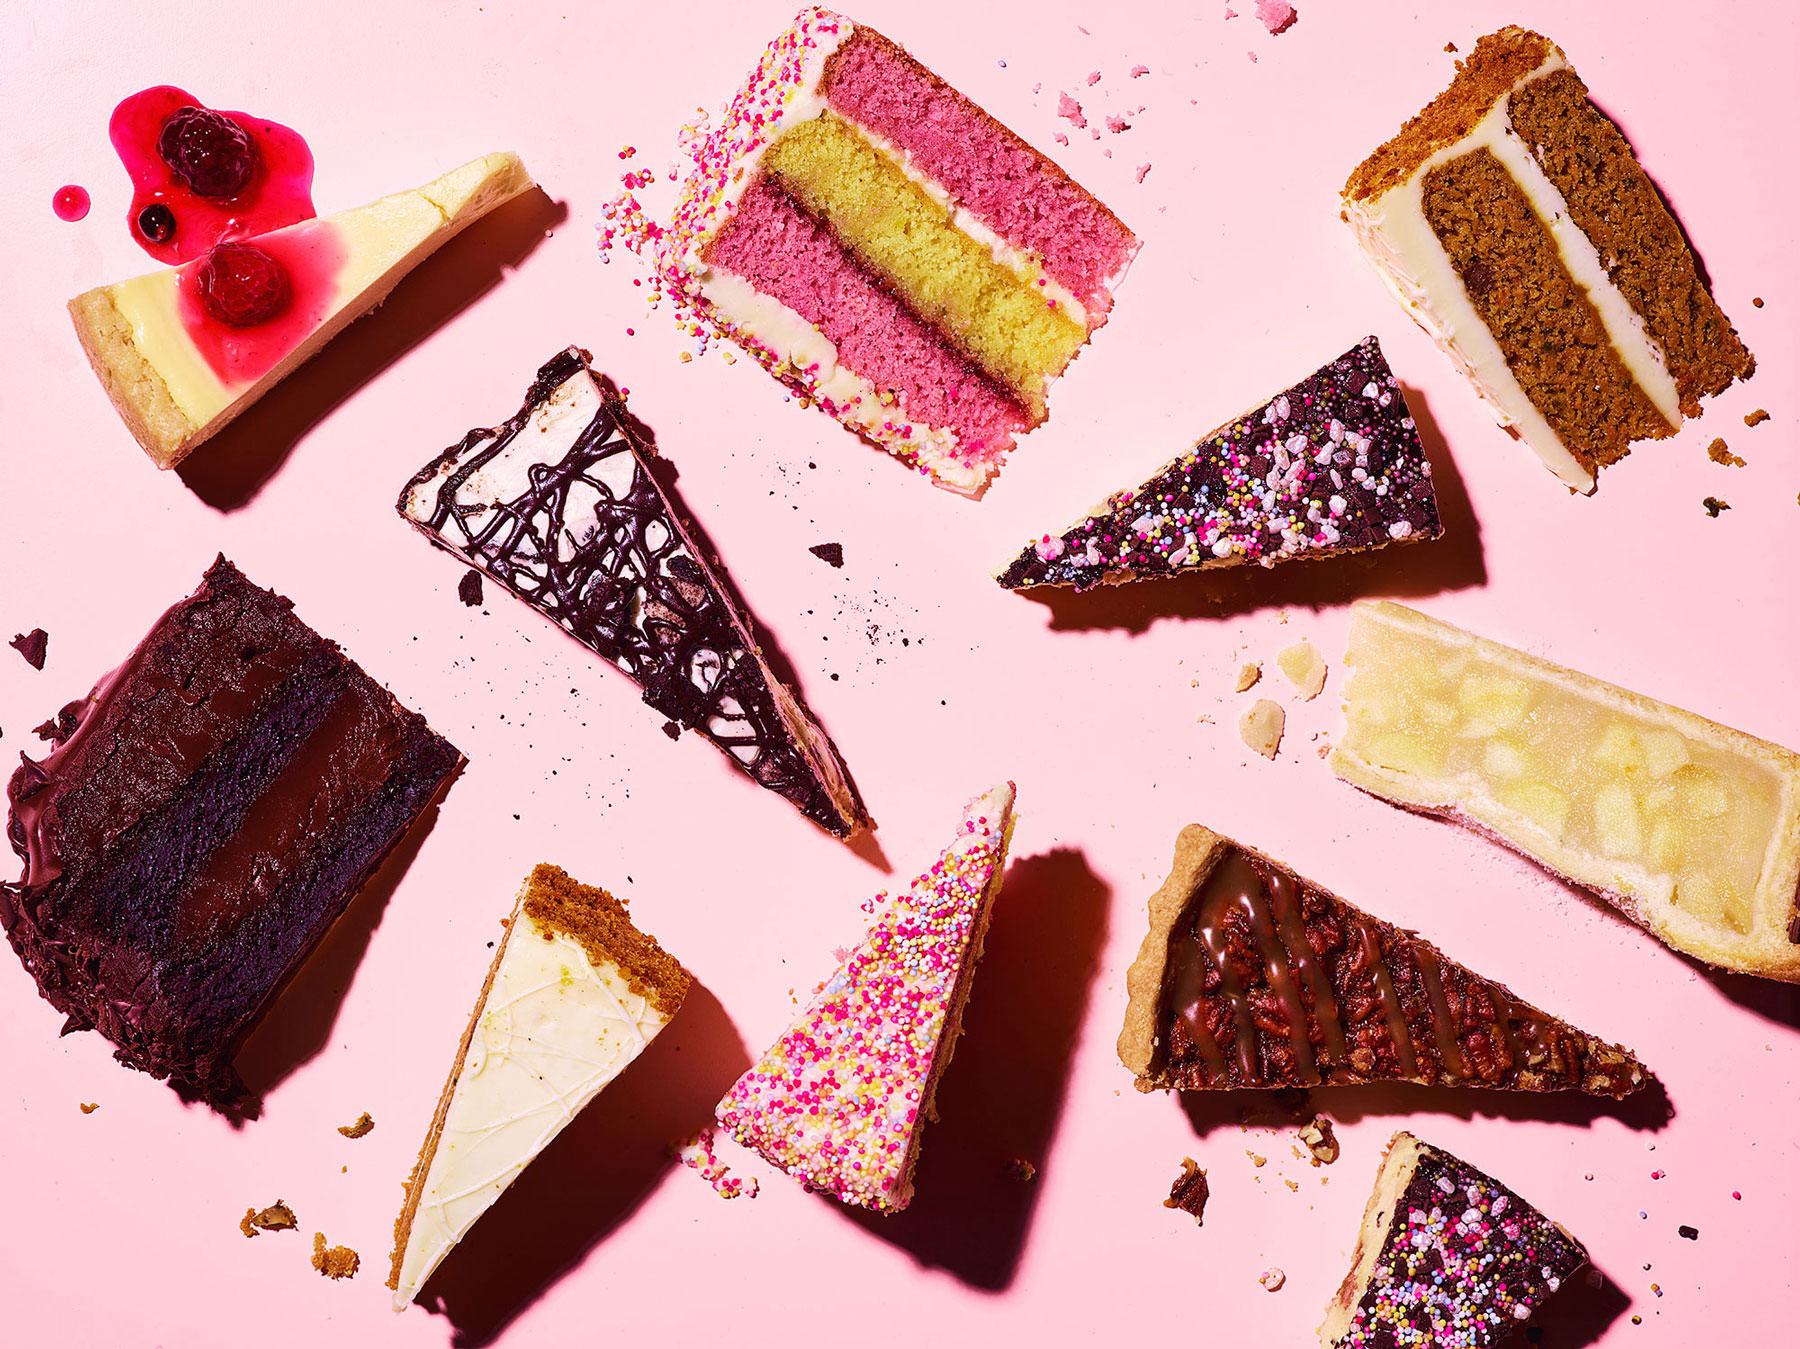 overhead shot of a selection of different slices of cake arranged graphically on a pink background  - London Food & Drinks Photographer